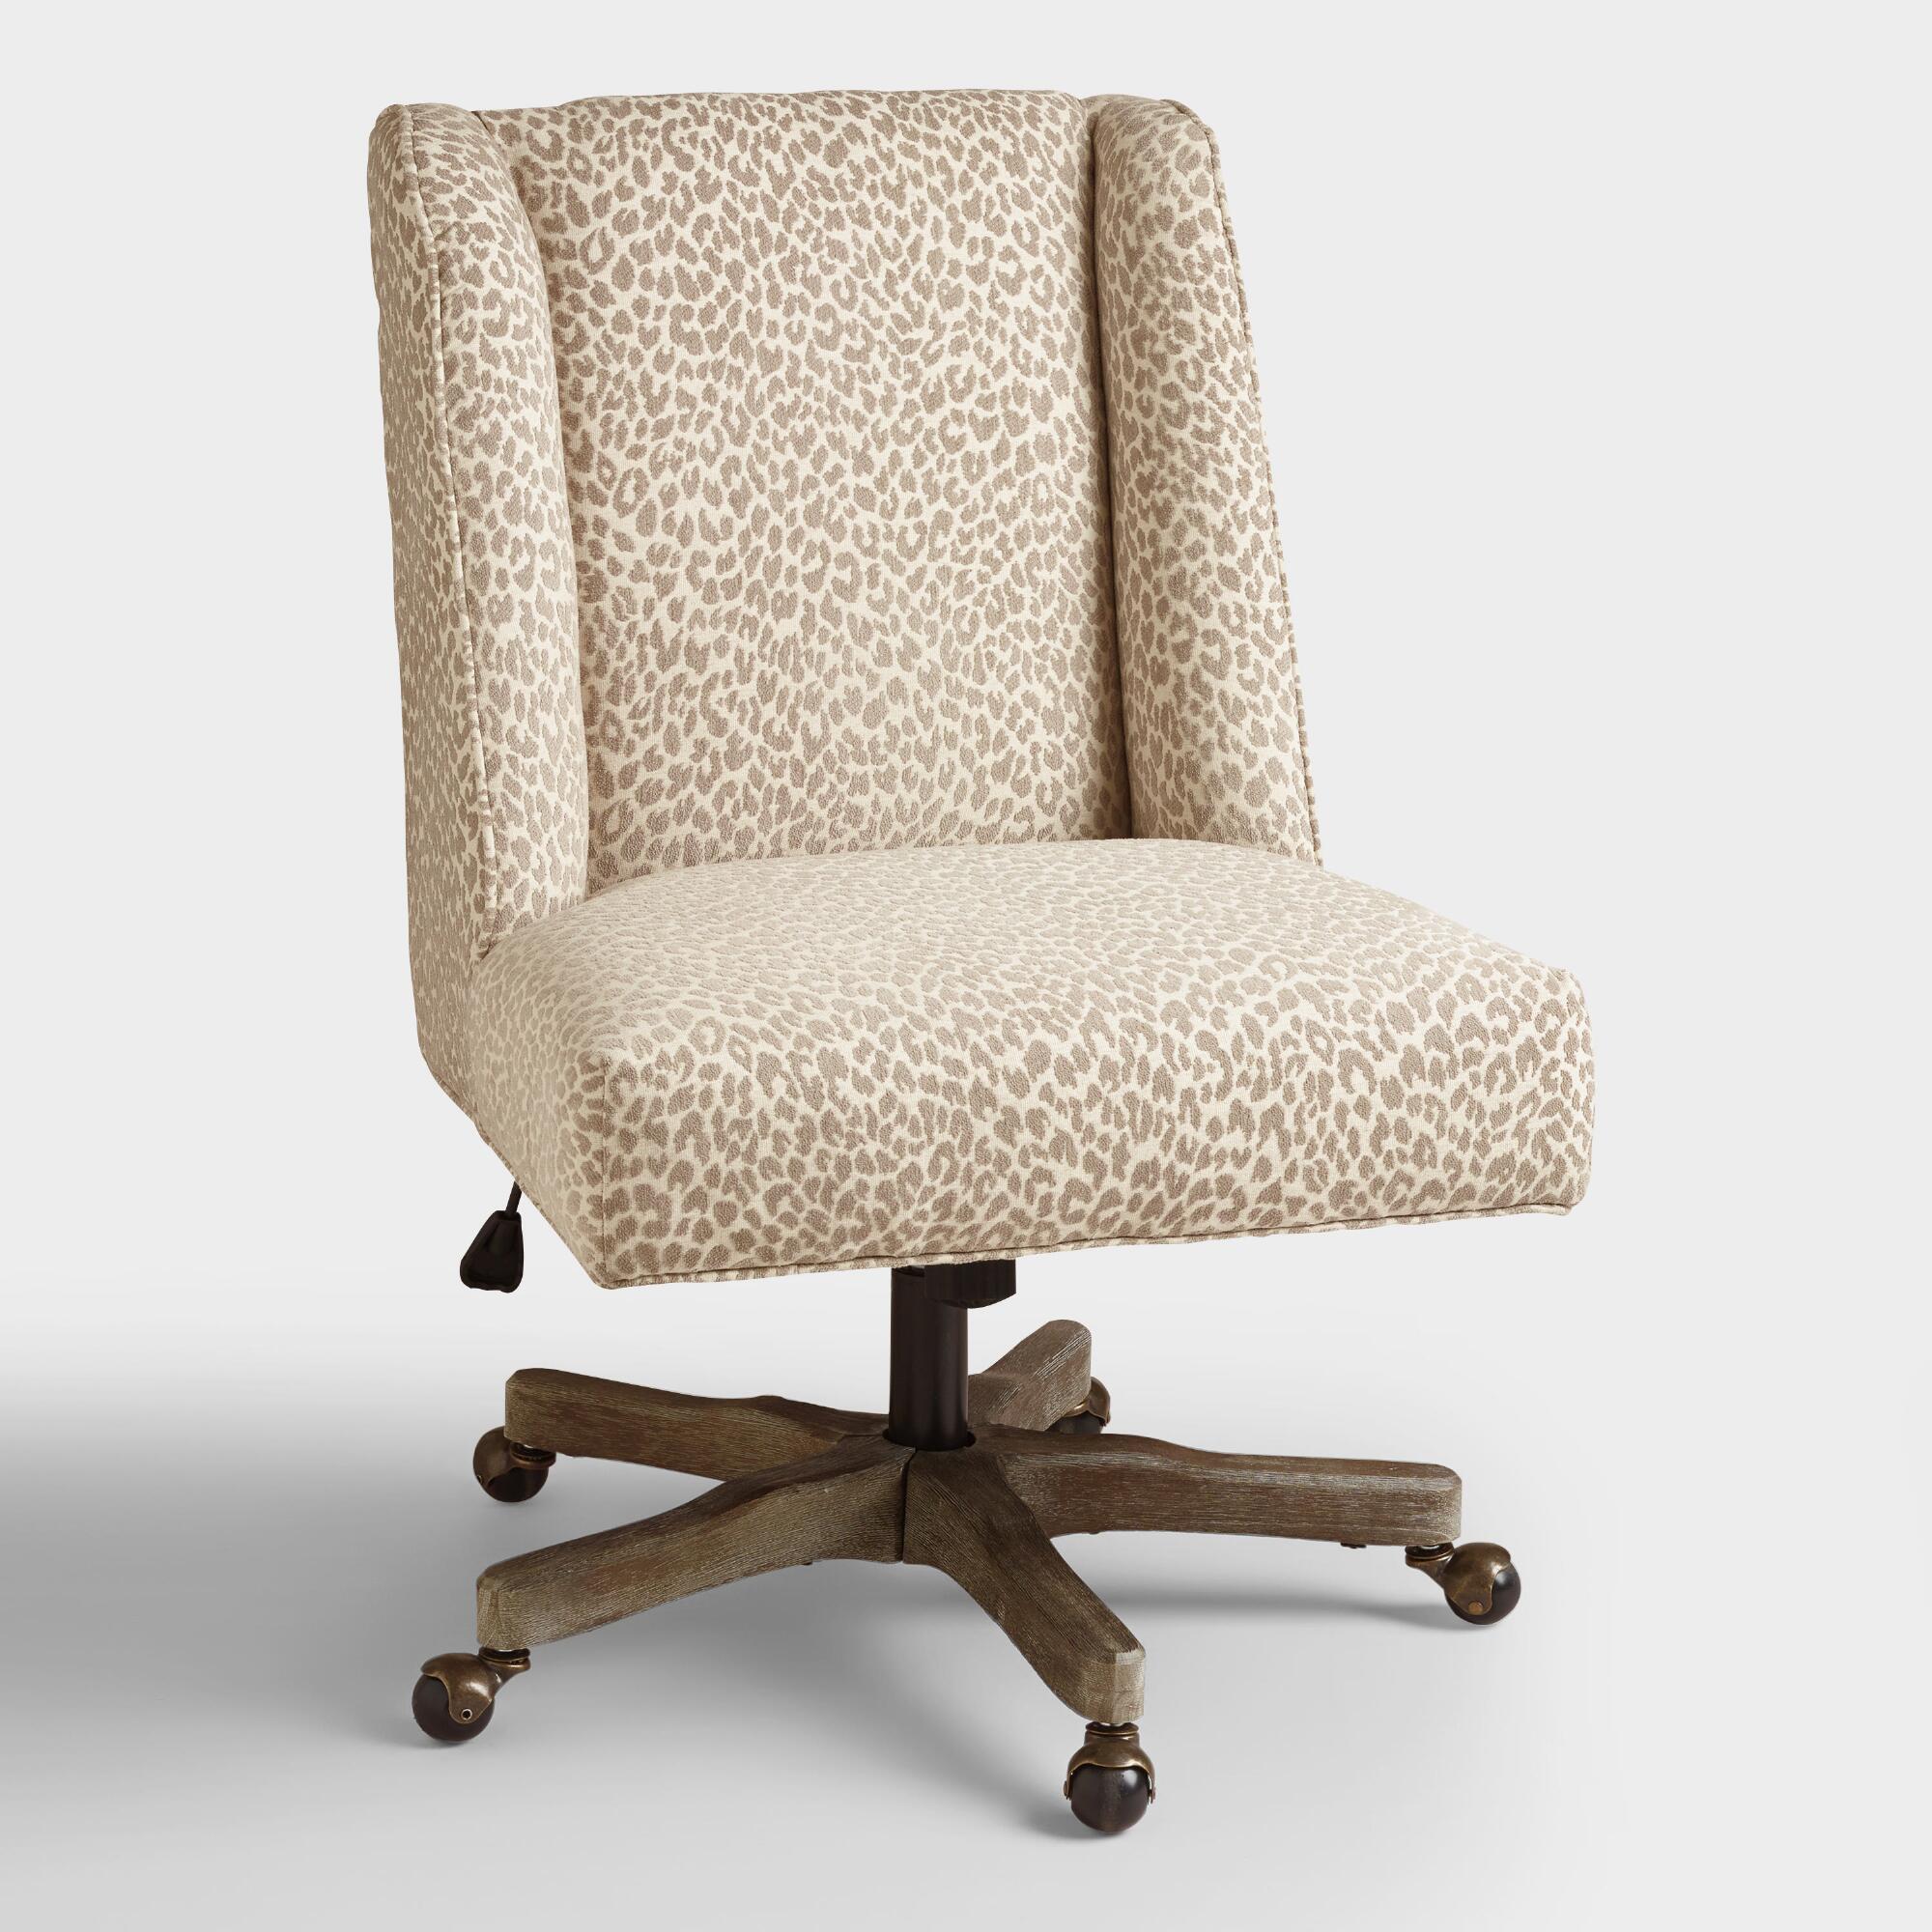 upholstered office chair